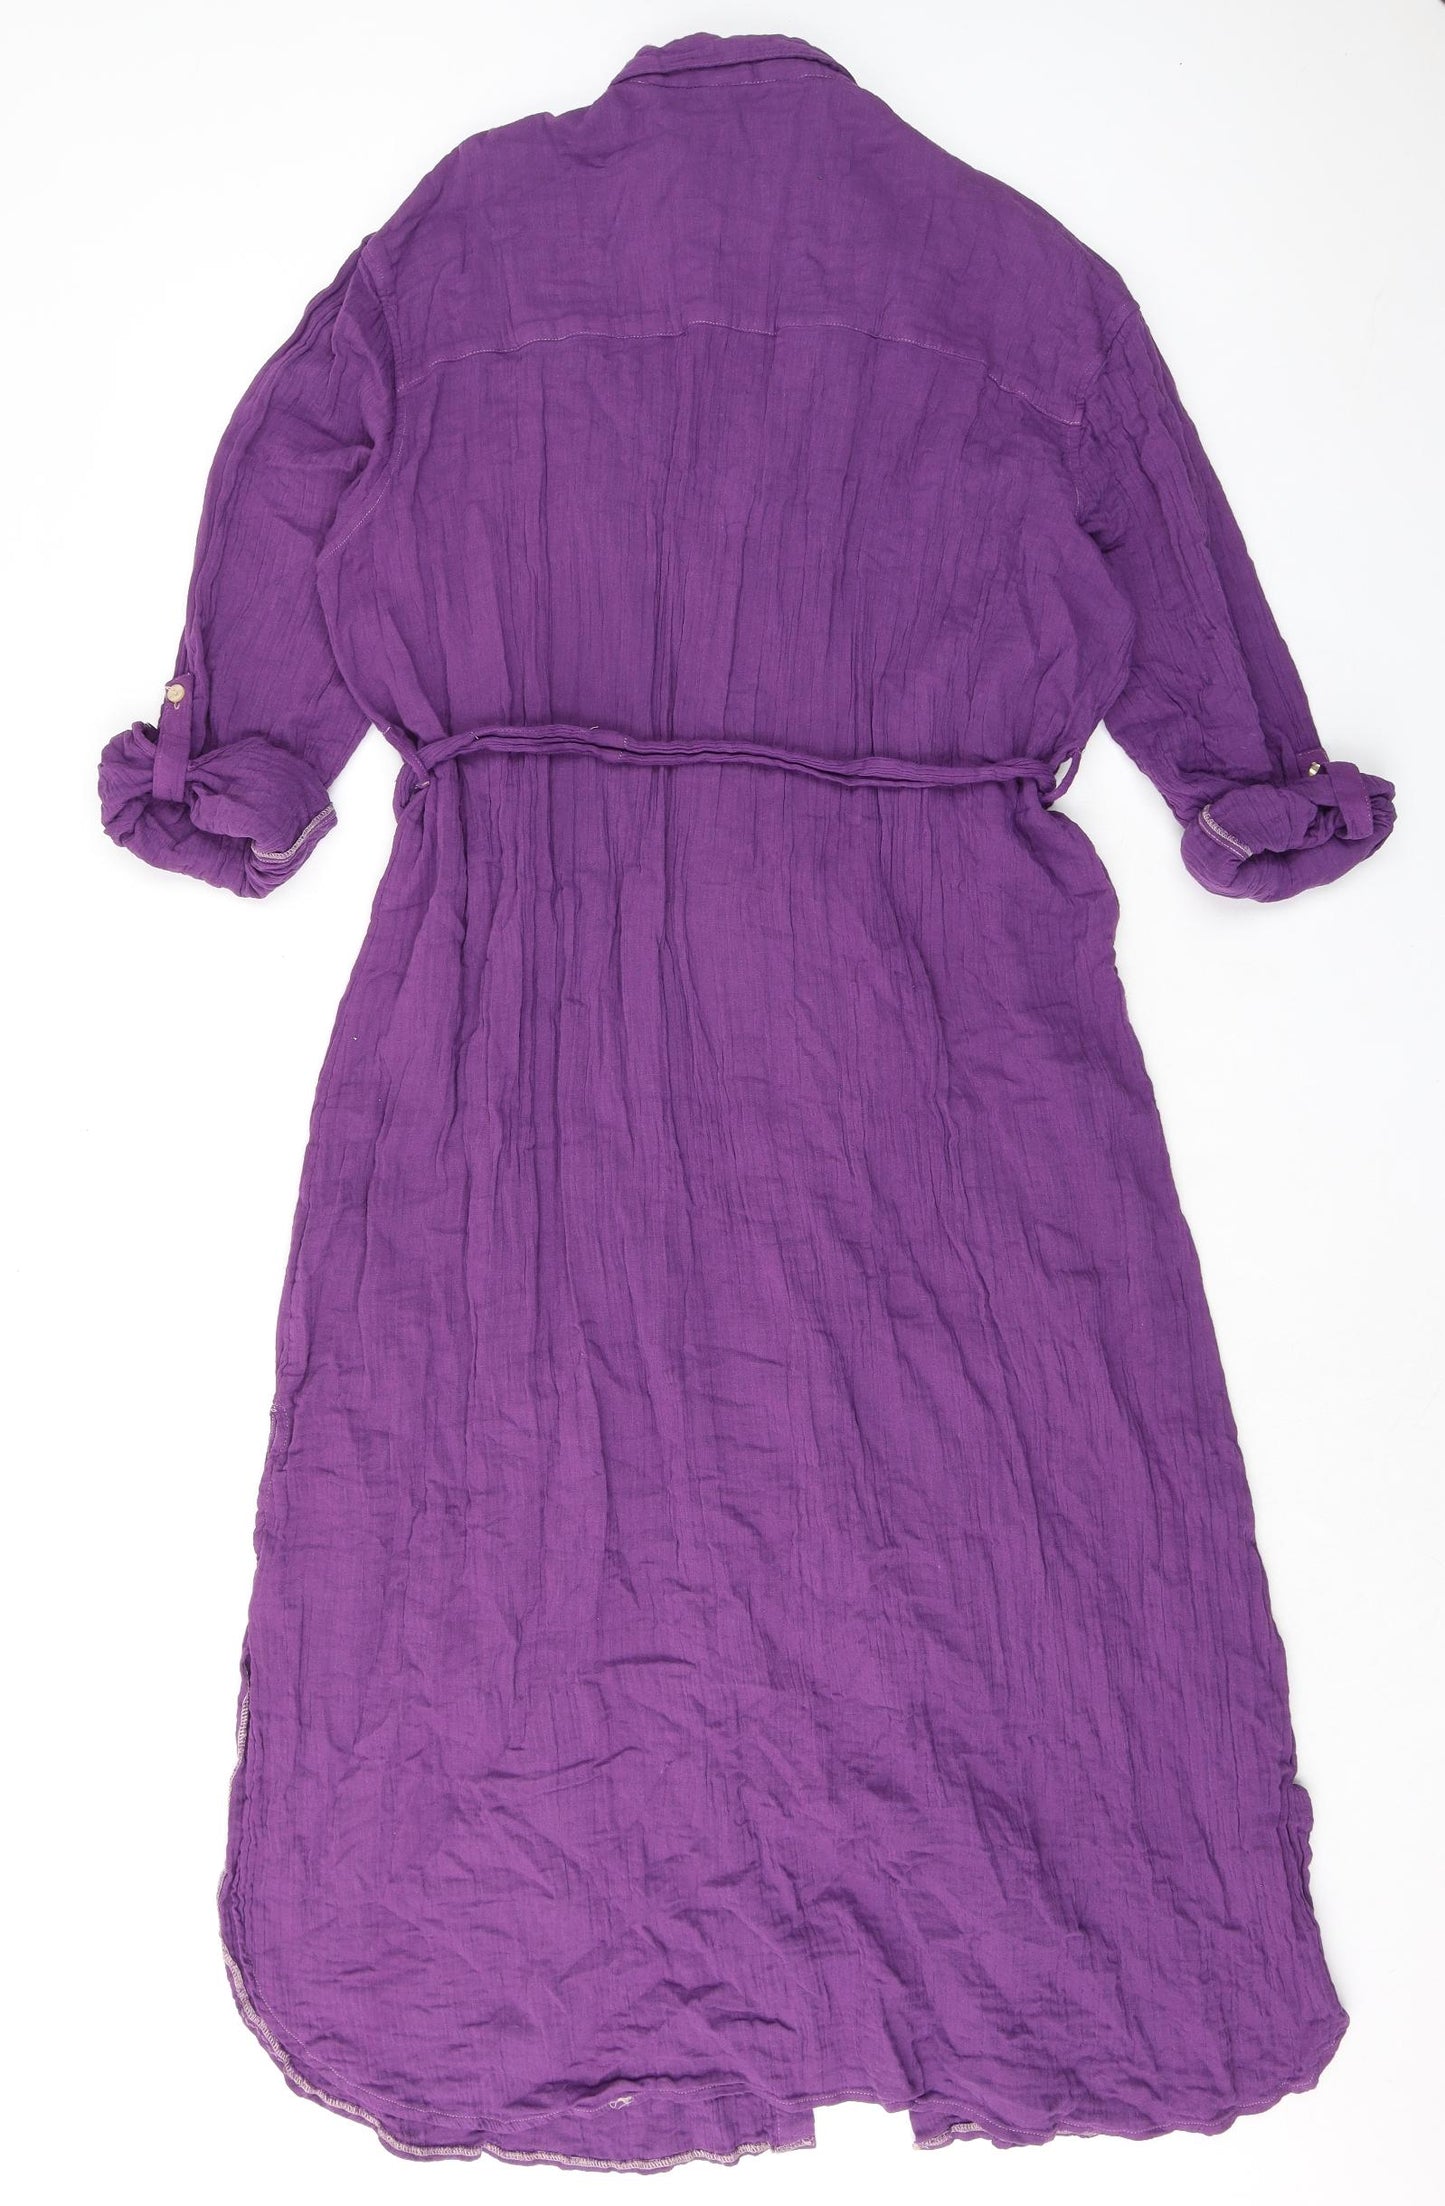 New Look Womens Purple 100% Cotton Shirt Dress Size 18 Collared Button